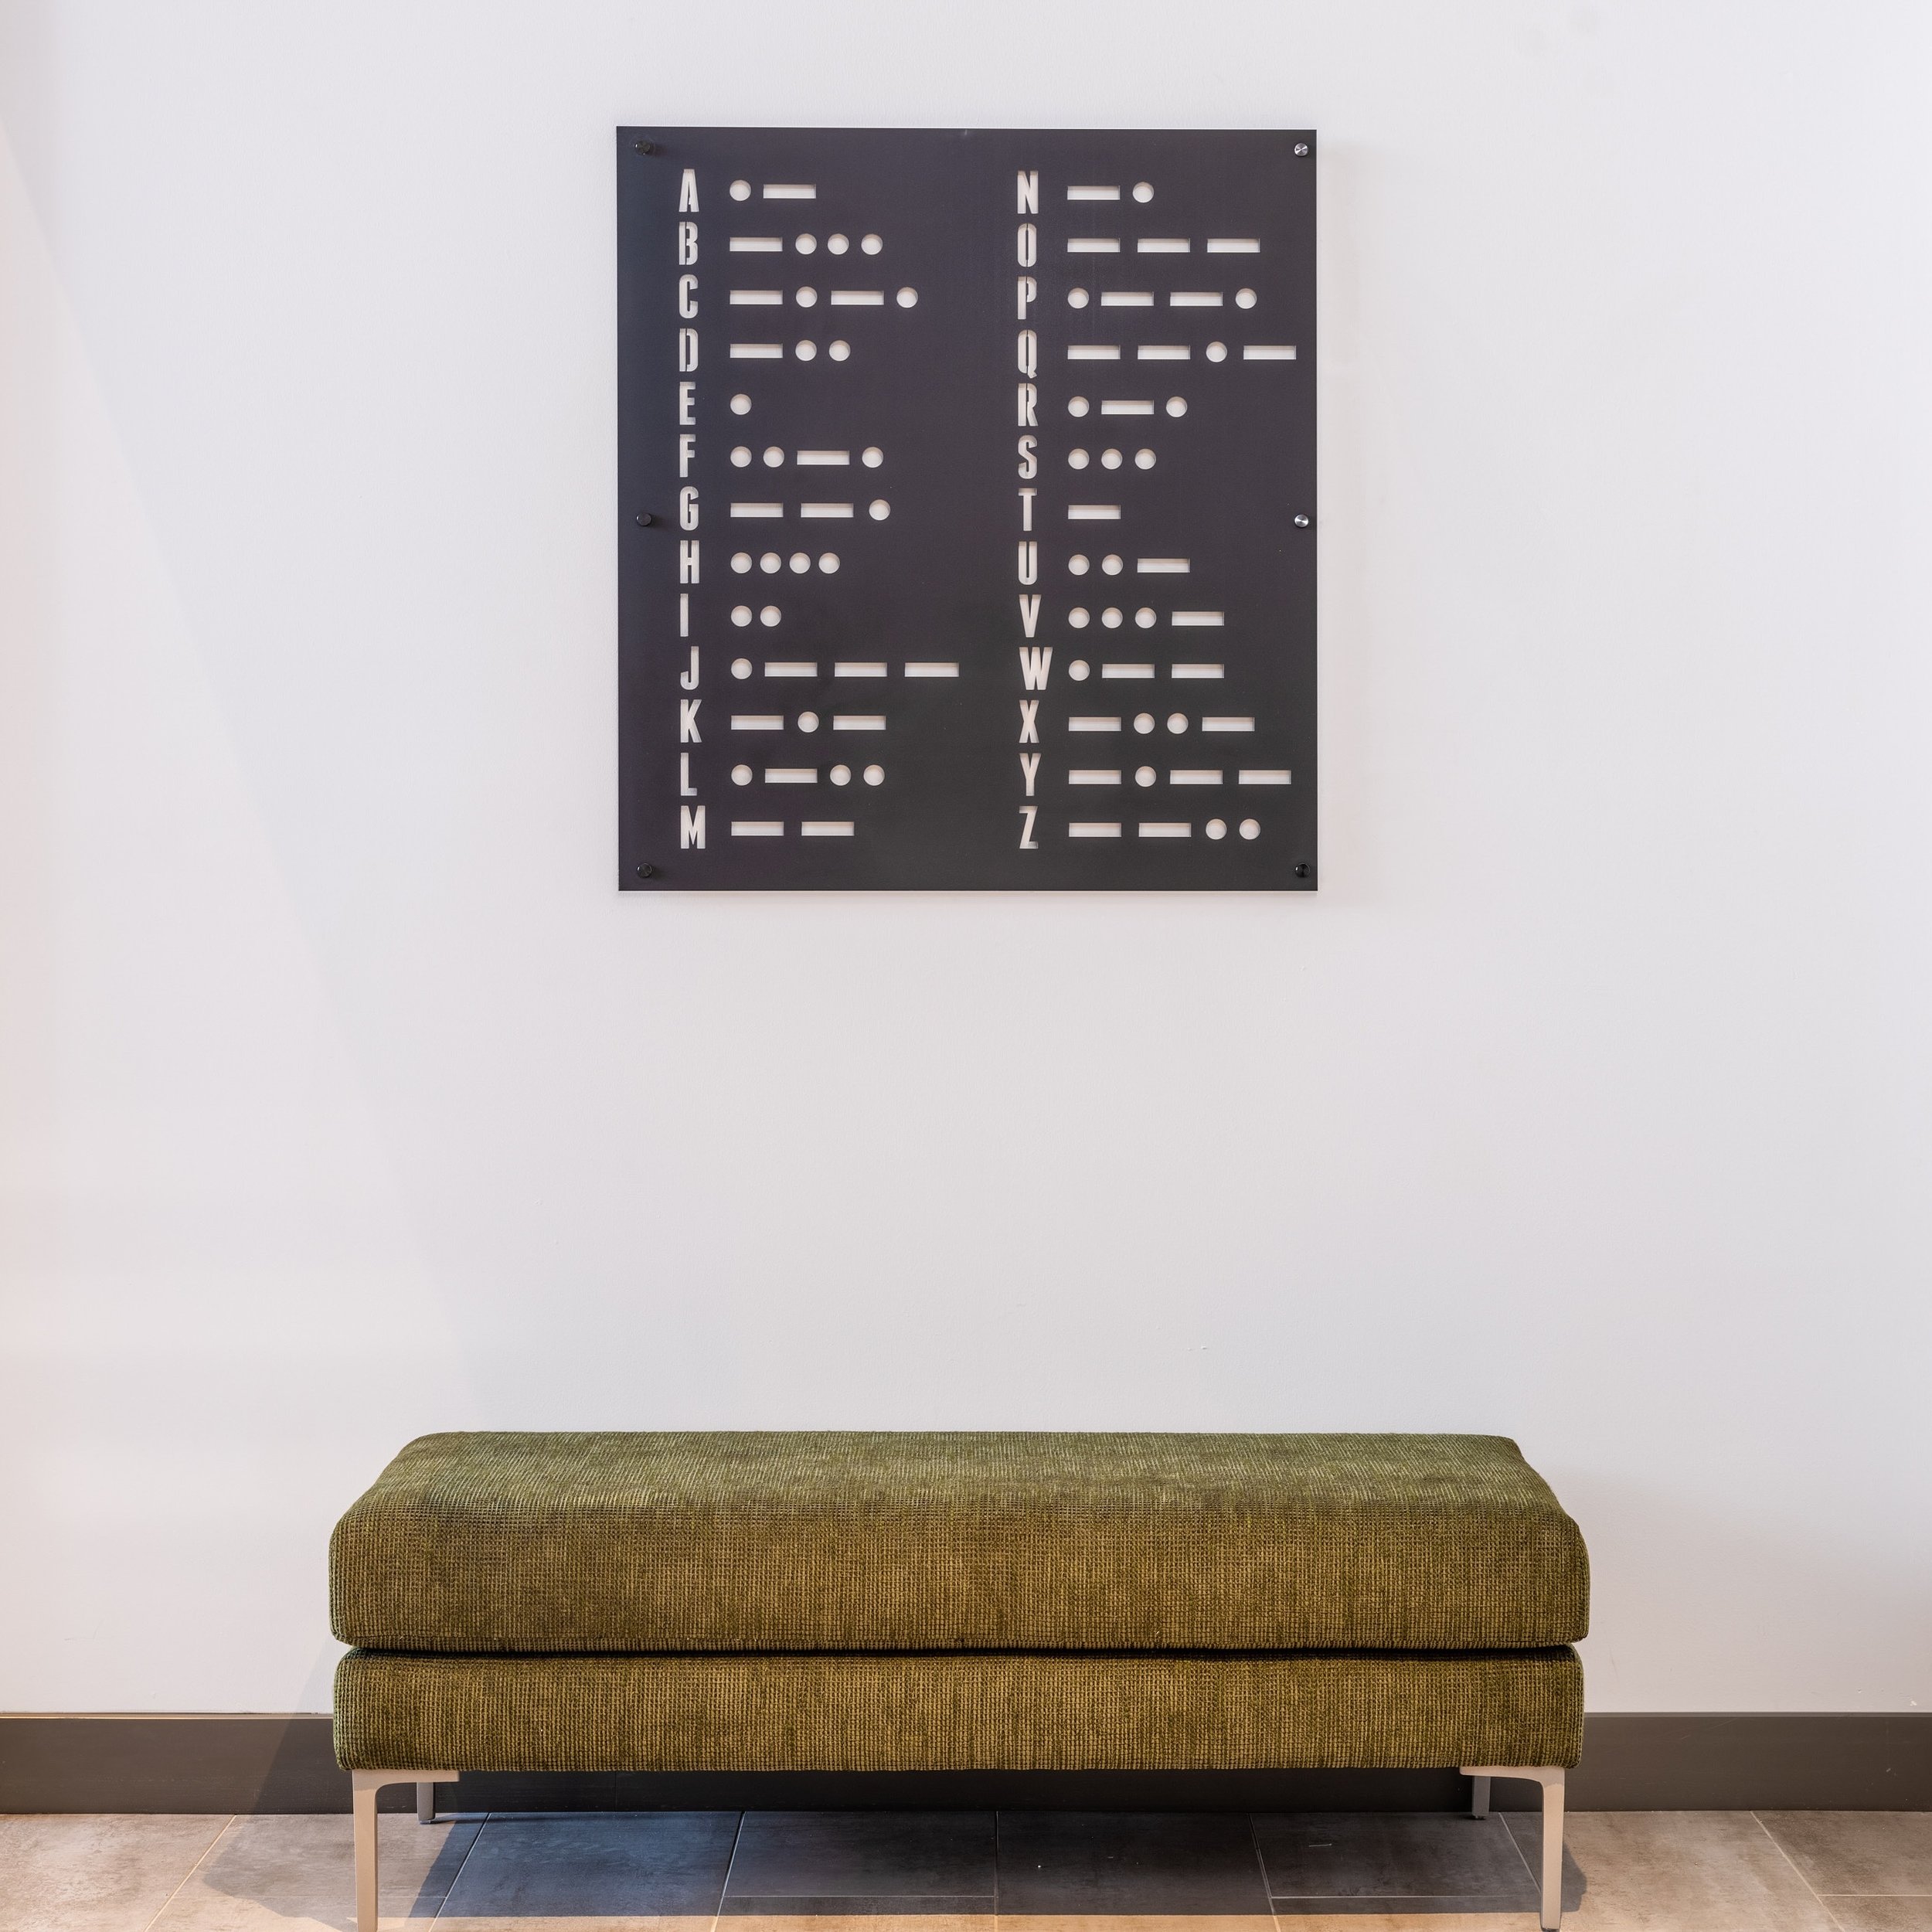 Crafting spaces that speak volumes &ndash; even in Morse code! ✨ At FII, we&rsquo;re fluent in design language and ADA compliance. Every detail, every code &ndash; meticulously woven into our creations to ensure inclusivity and accessibility for all.